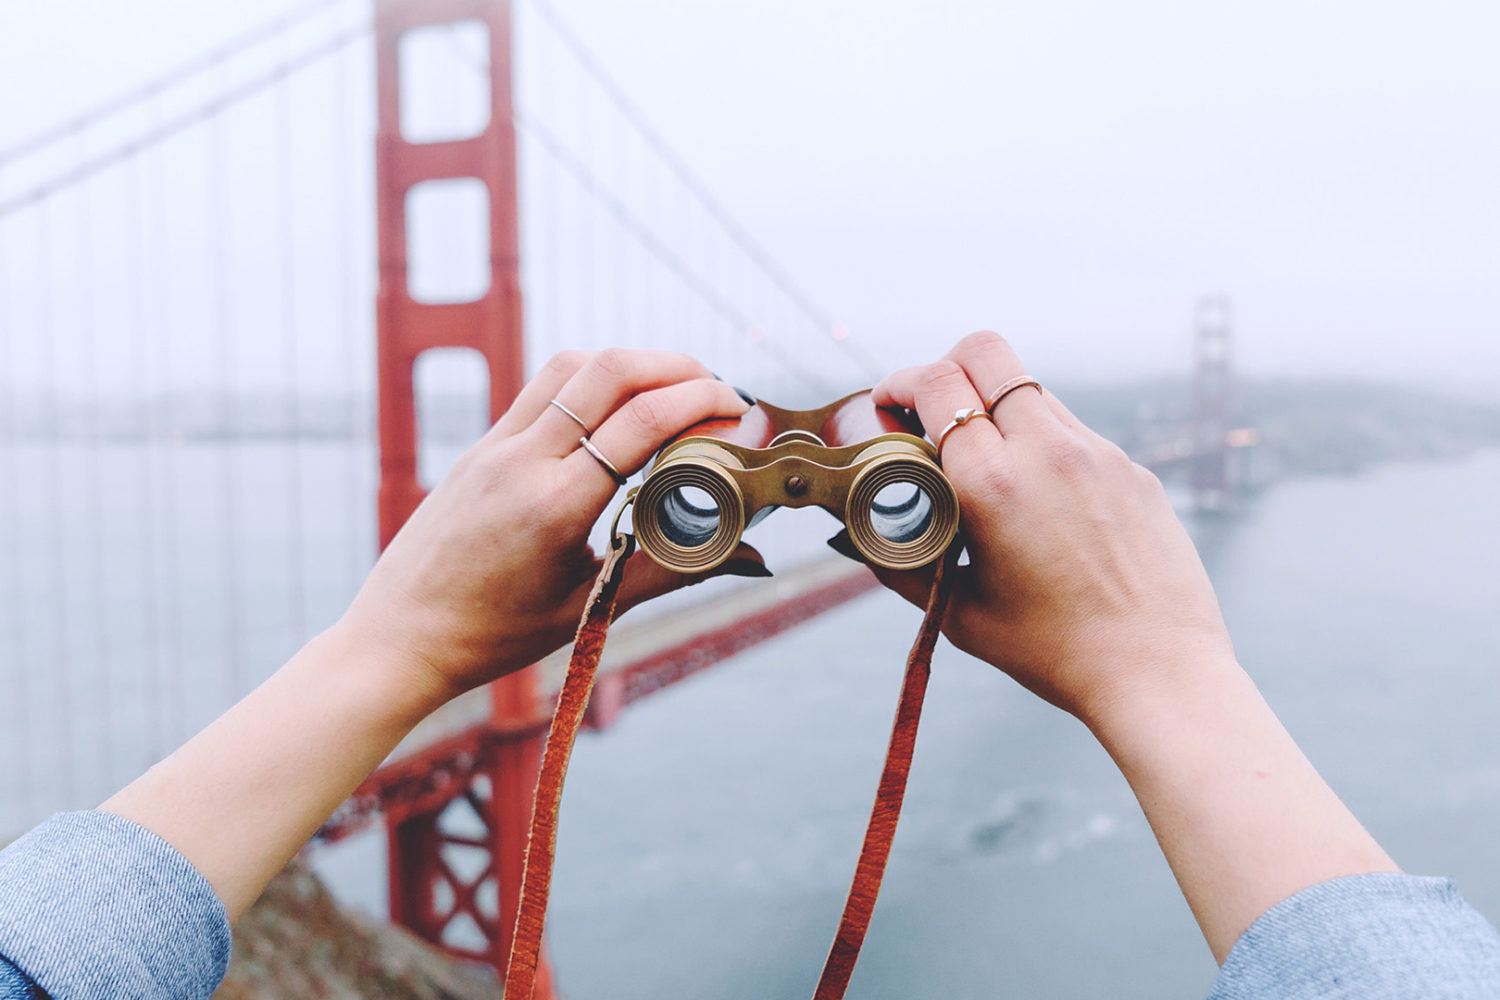 15 Awesomely Meta Photos of People Taking Photos - 500px